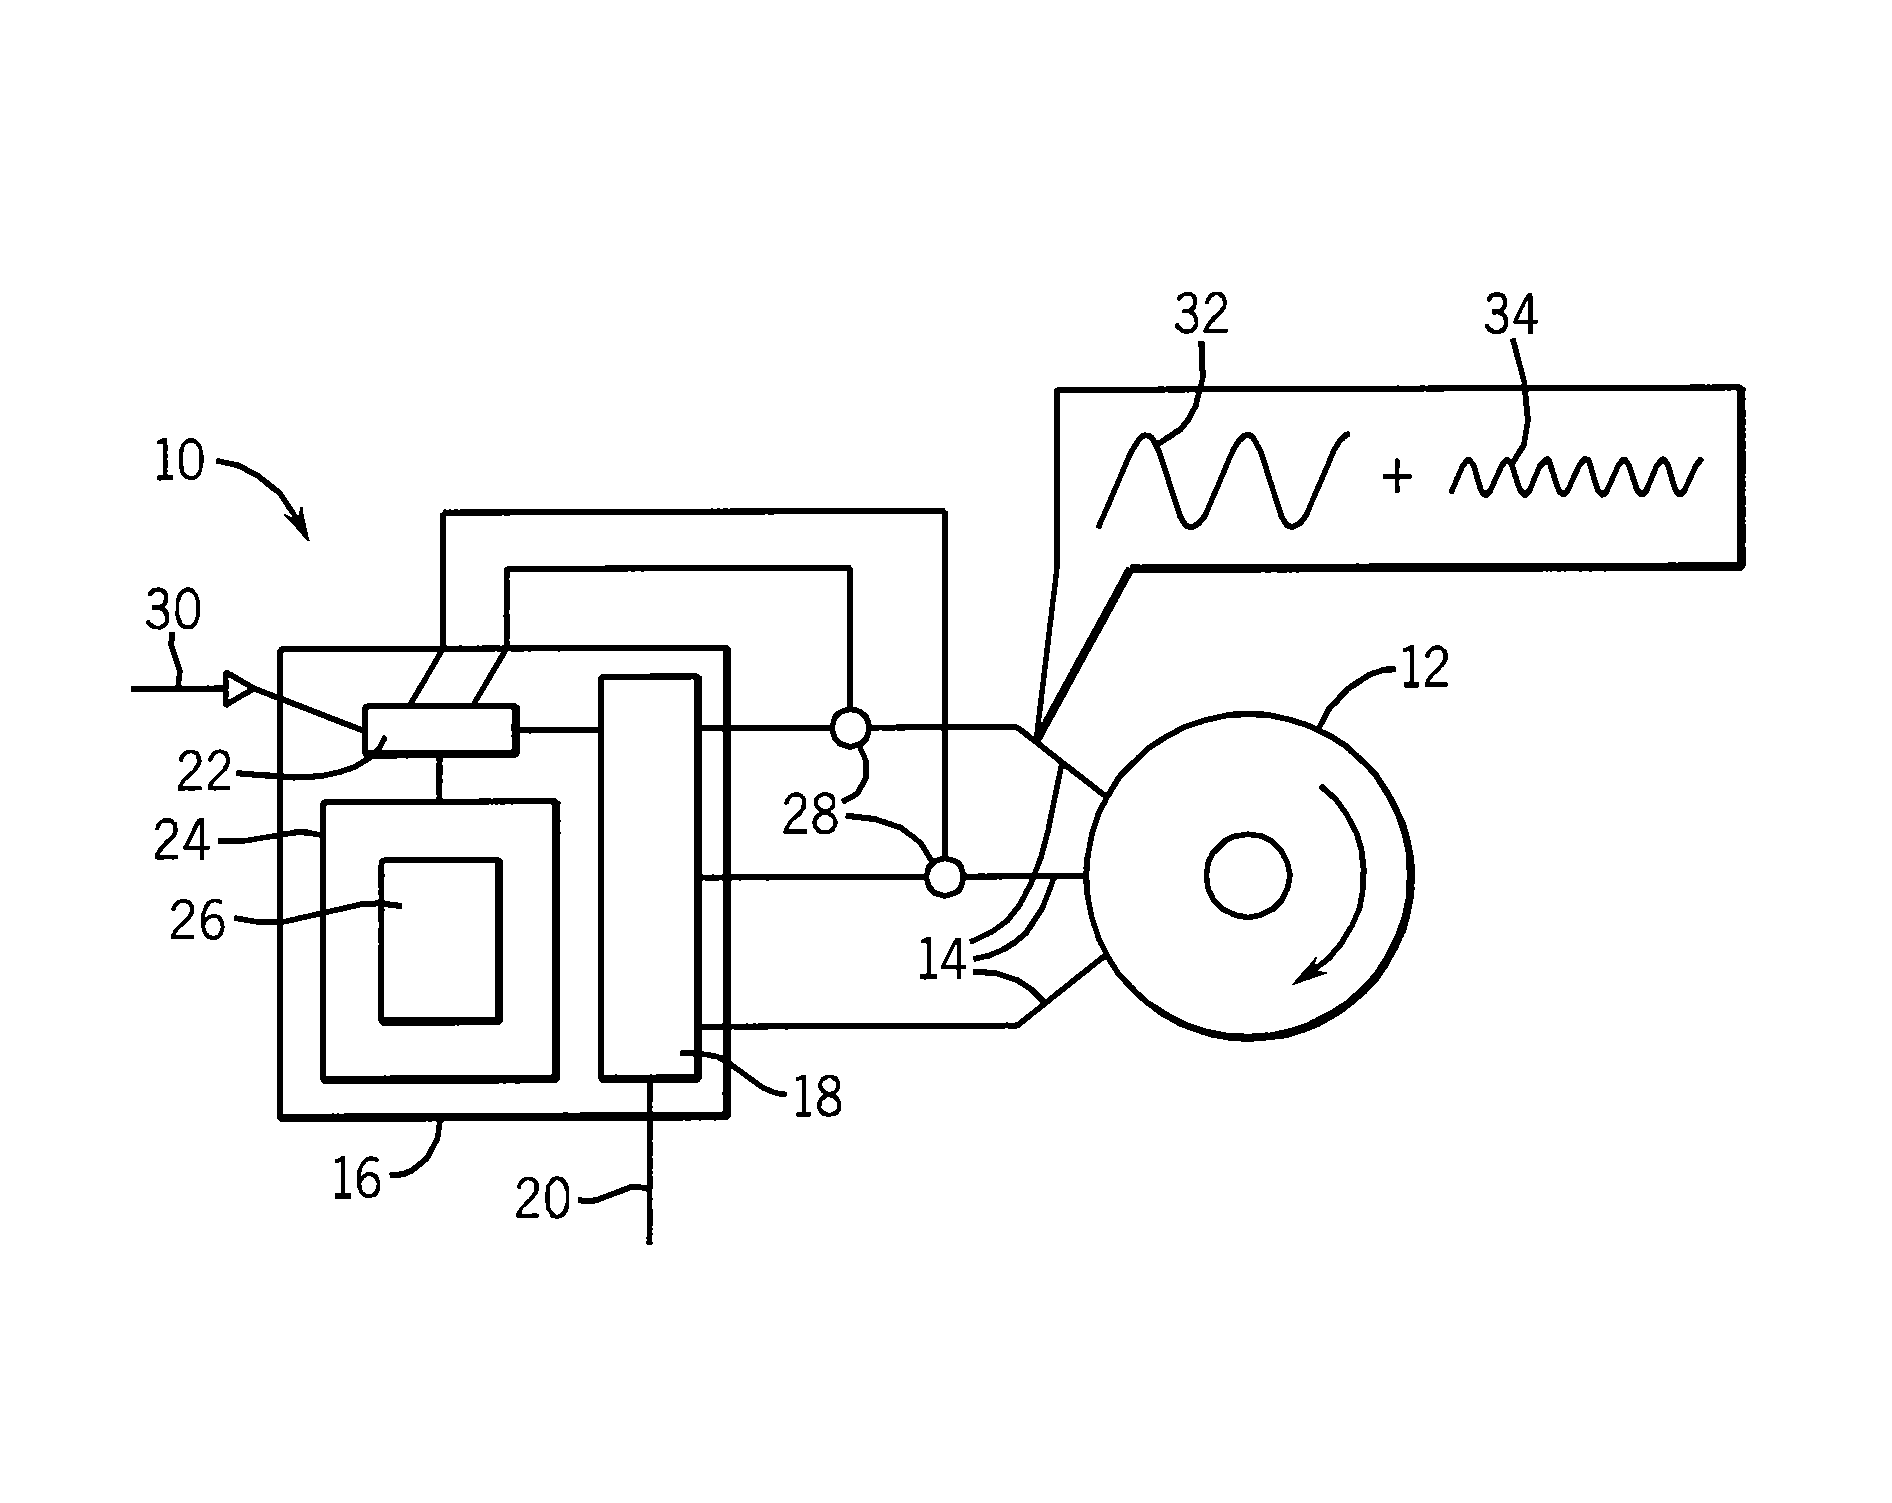 Permanent magnet motor with stator-based saliency for position sensorless drive